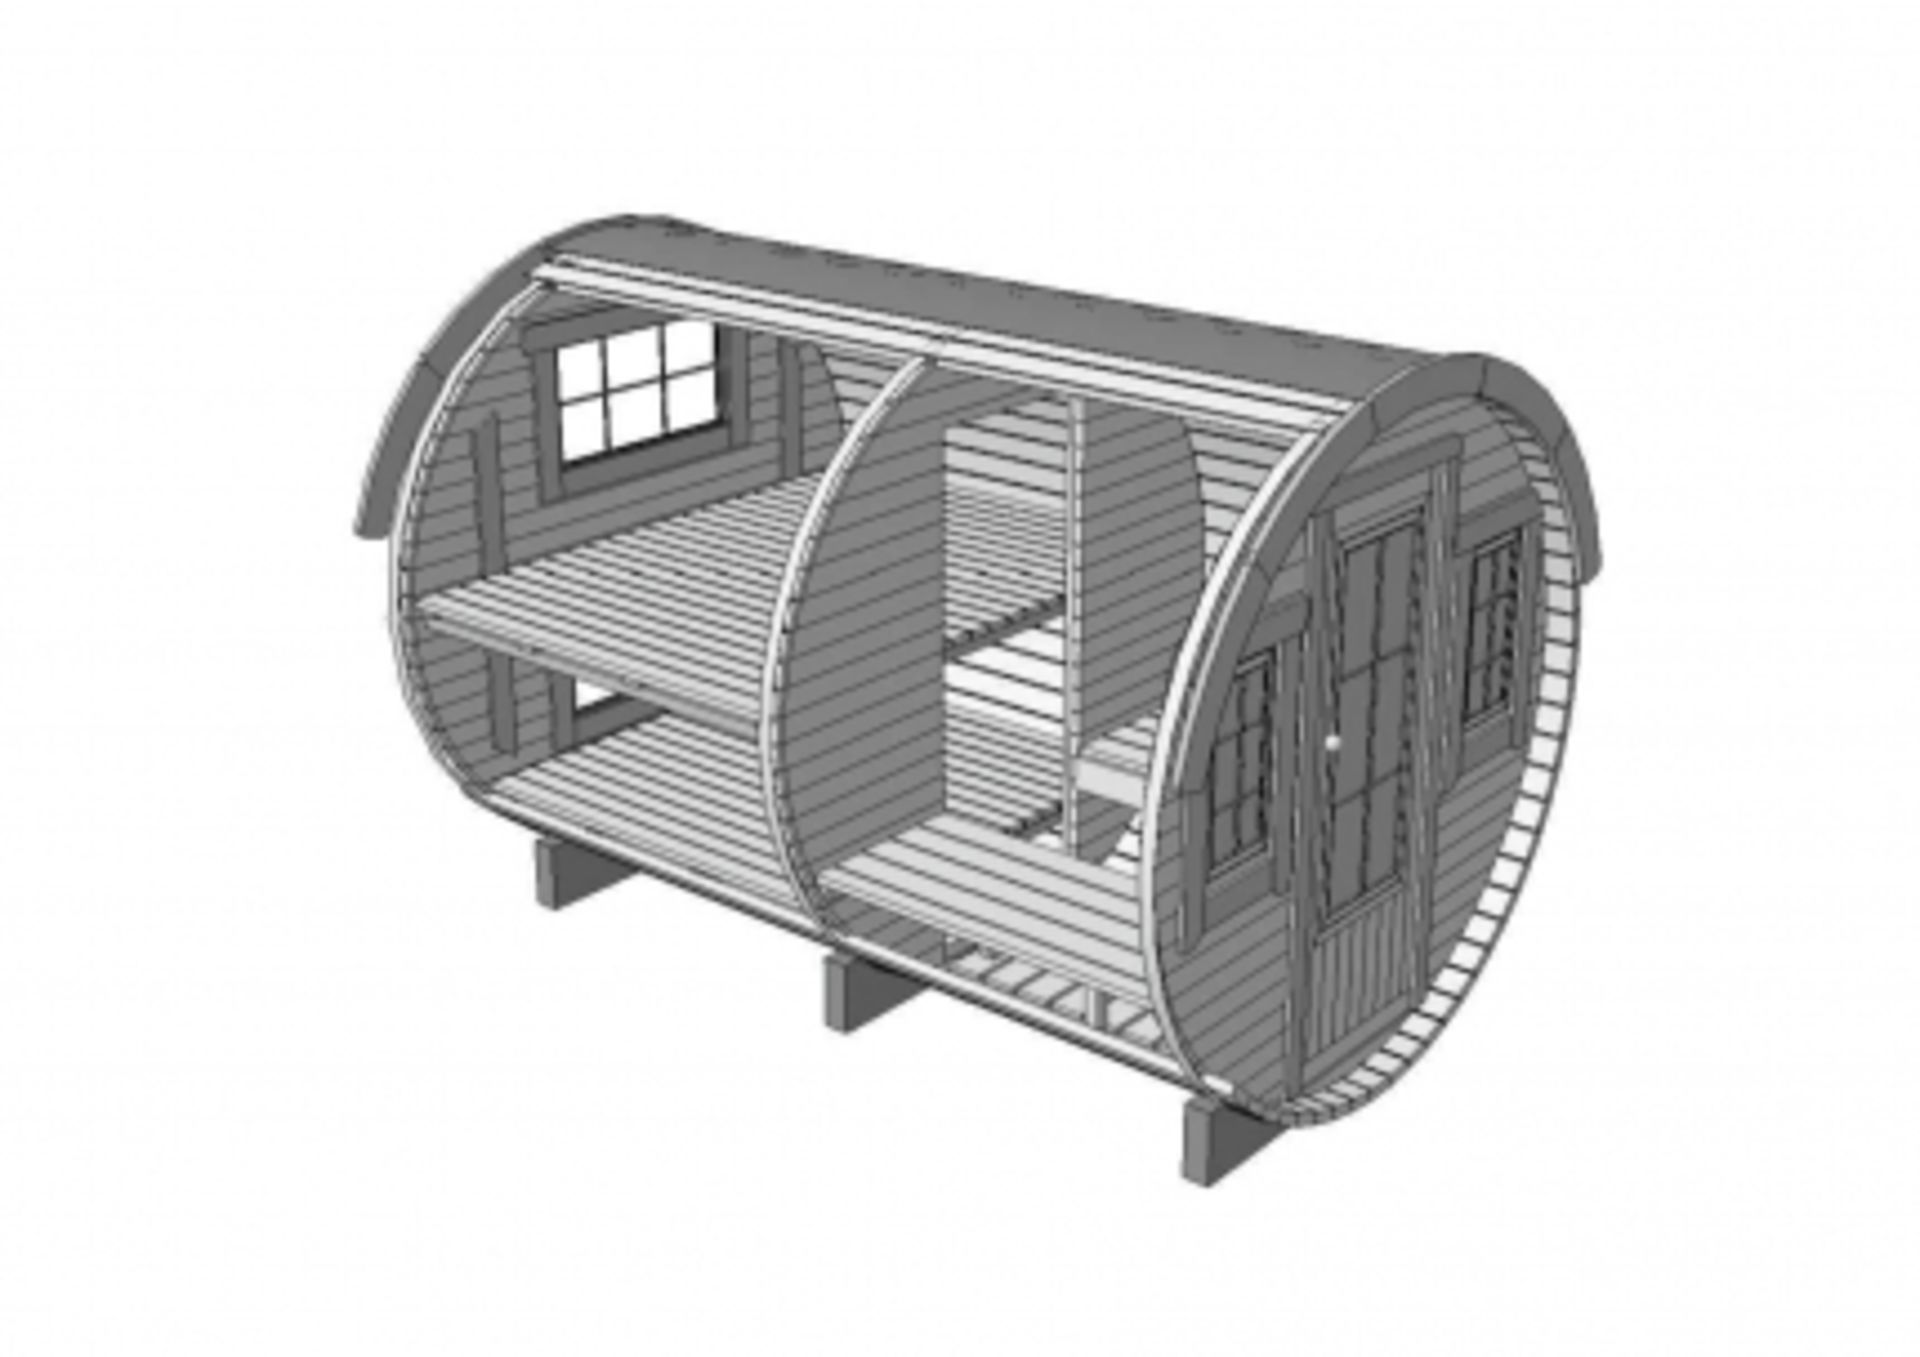 V Brand New 2.2 x 3.3m Barrel For Sleeping - Sleeping & Sitting Rooms Inside - Sleeping Room With - Image 4 of 4